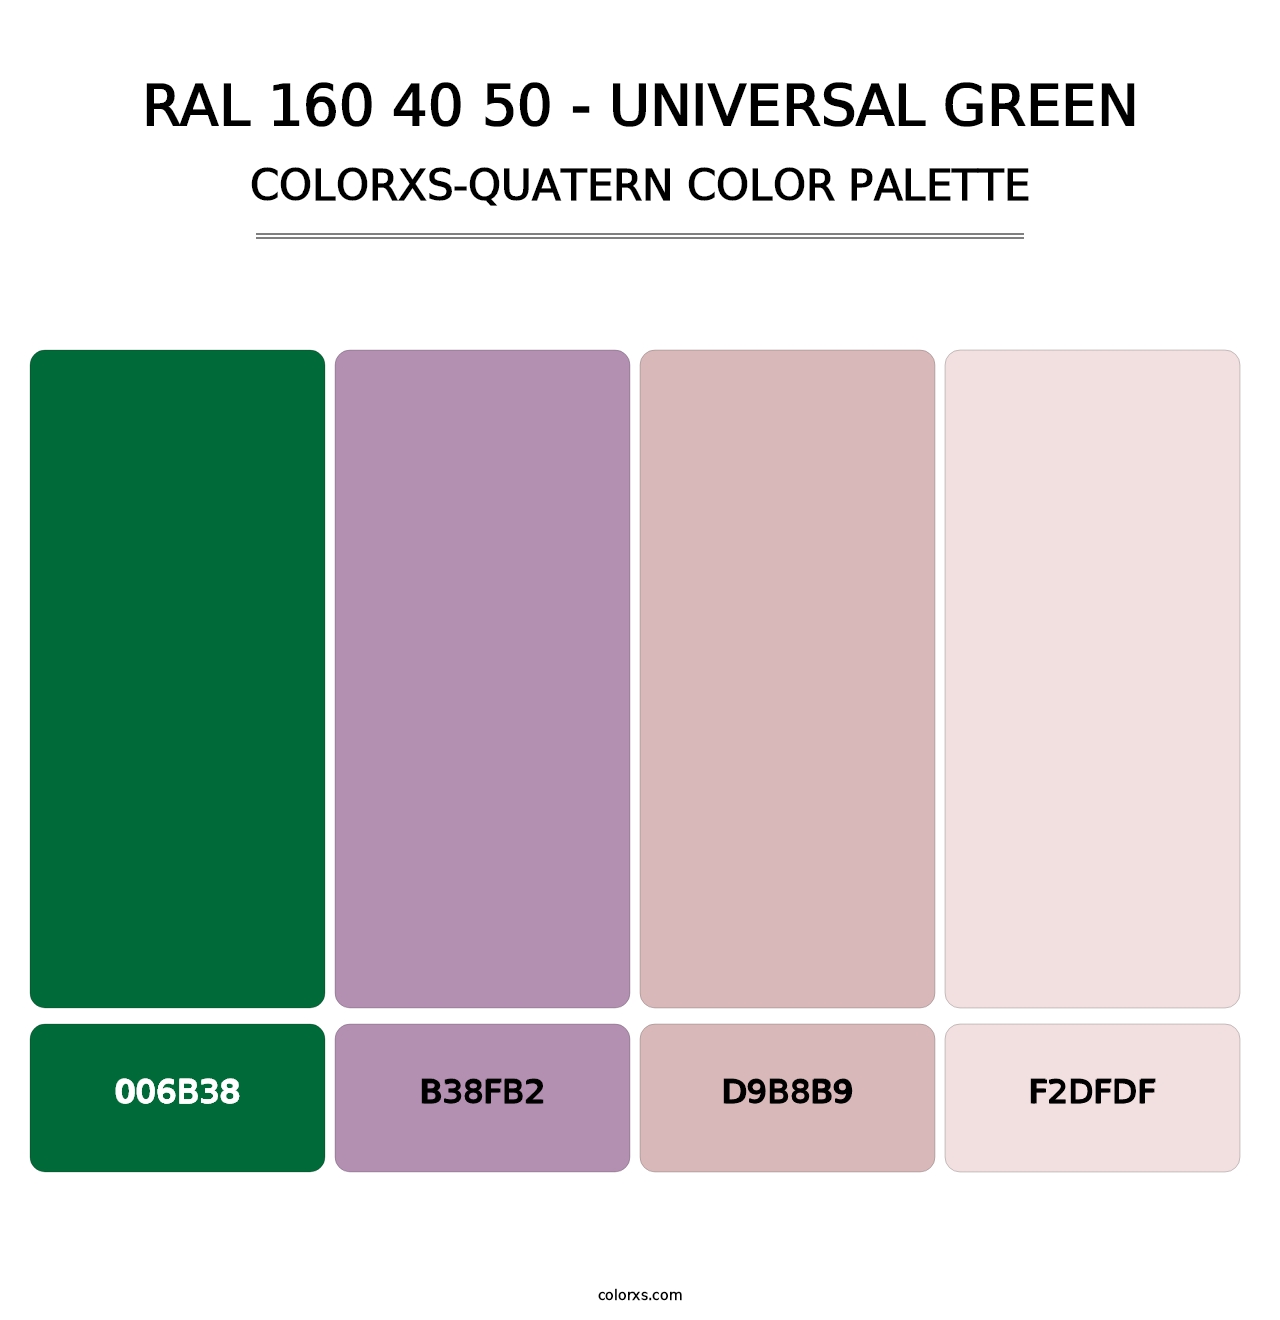 RAL 160 40 50 - Universal Green - Colorxs Quatern Palette